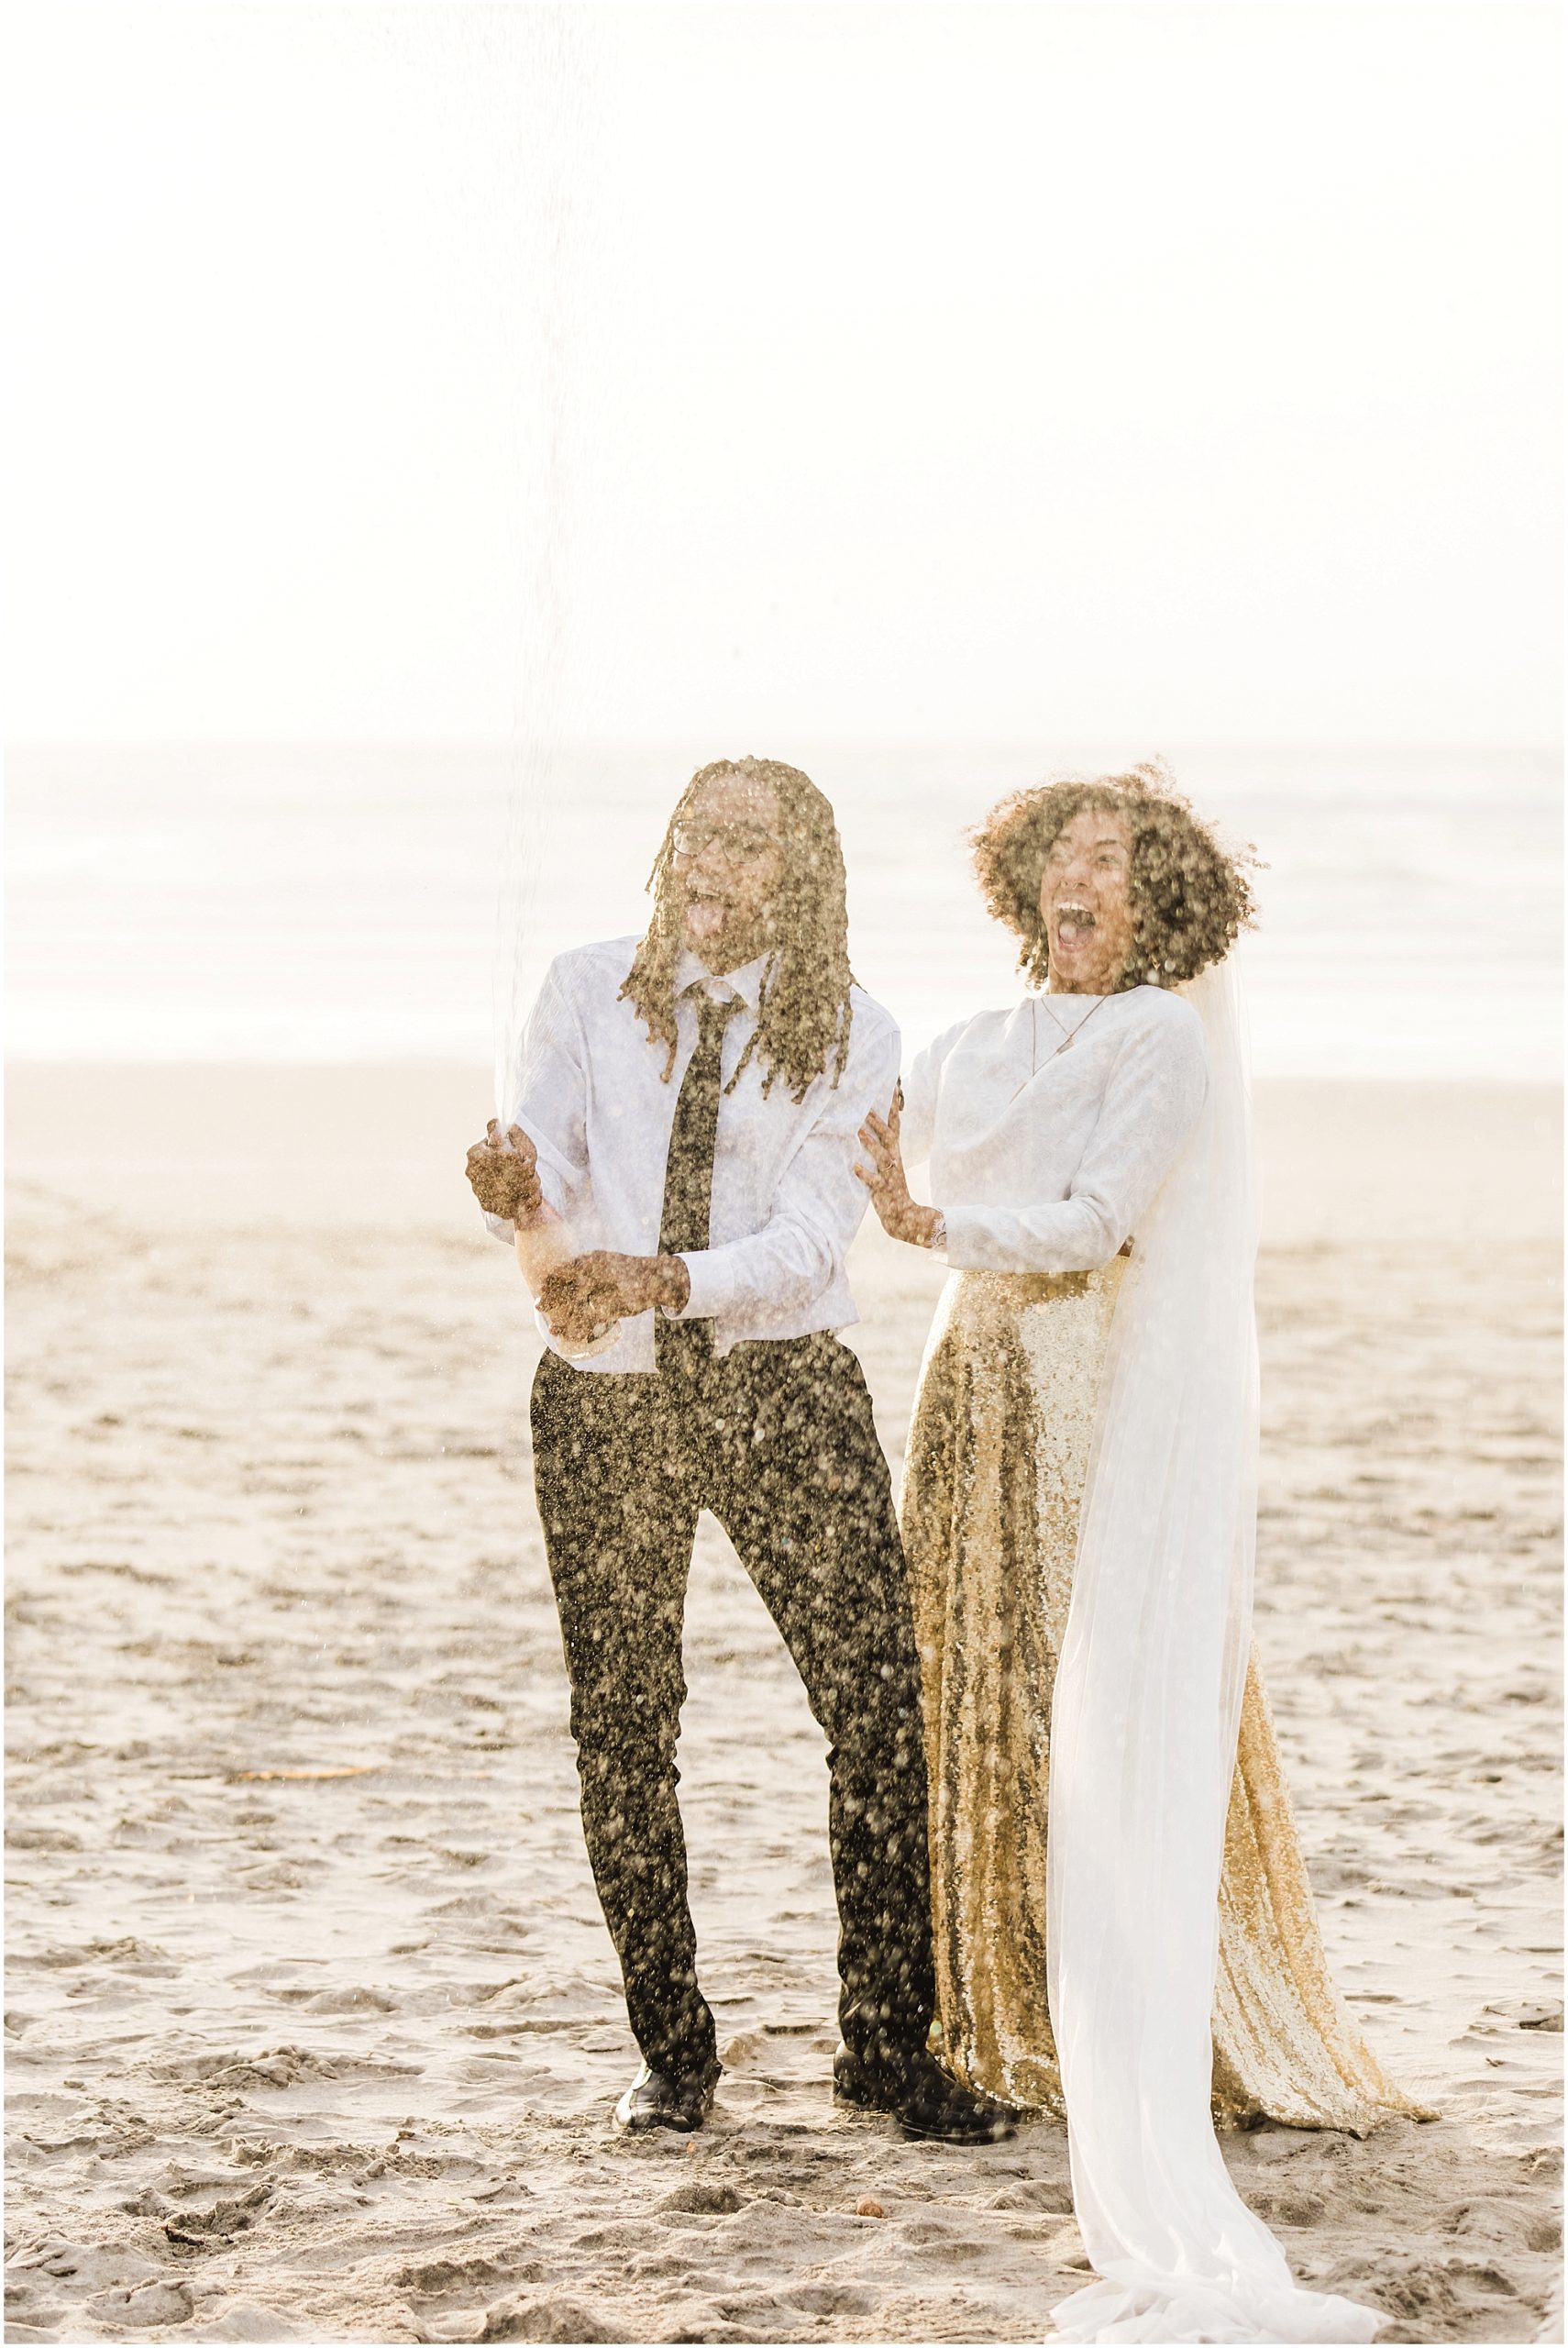 A black couple pops champagne on the beach to celebrate their wedding day during a beautiful Oregon Coast elopement in Neskowin. | Erica Swantek Photography